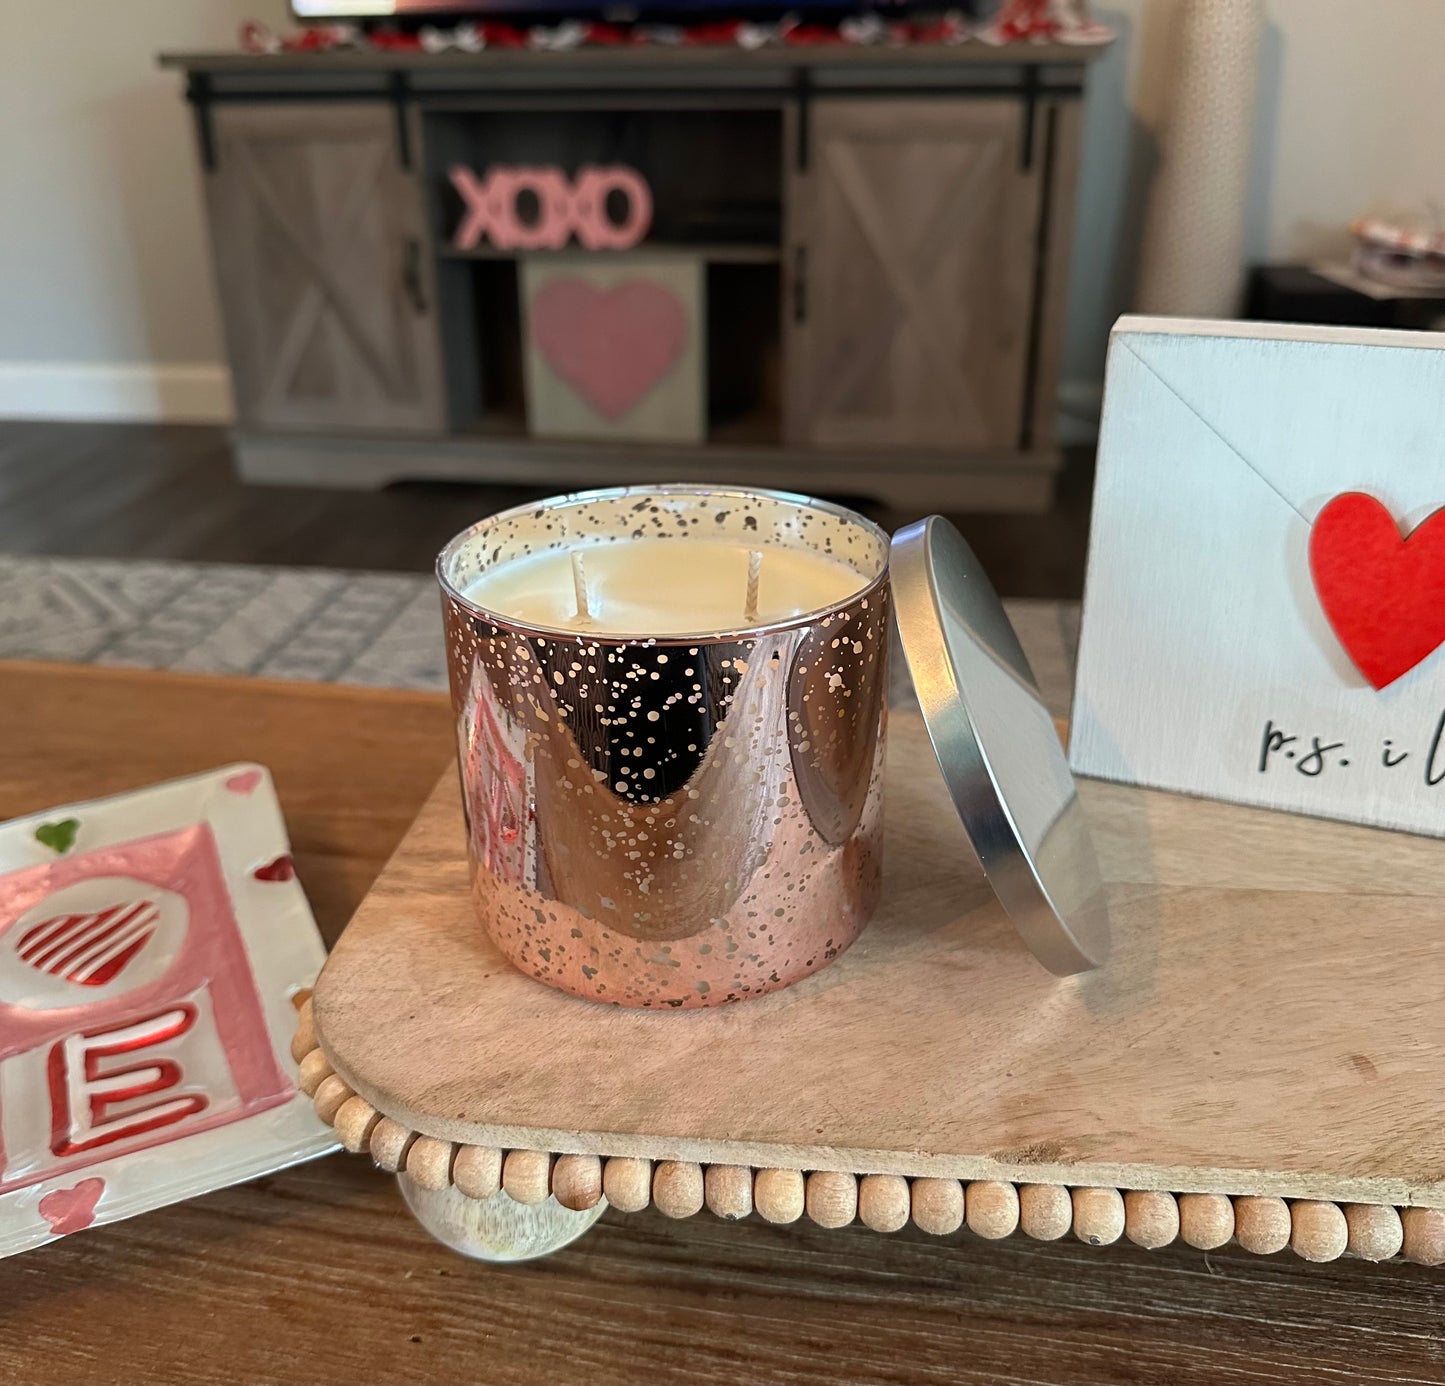 “You Are Loved” 18oz Rose Gold Mercury Soy Candle